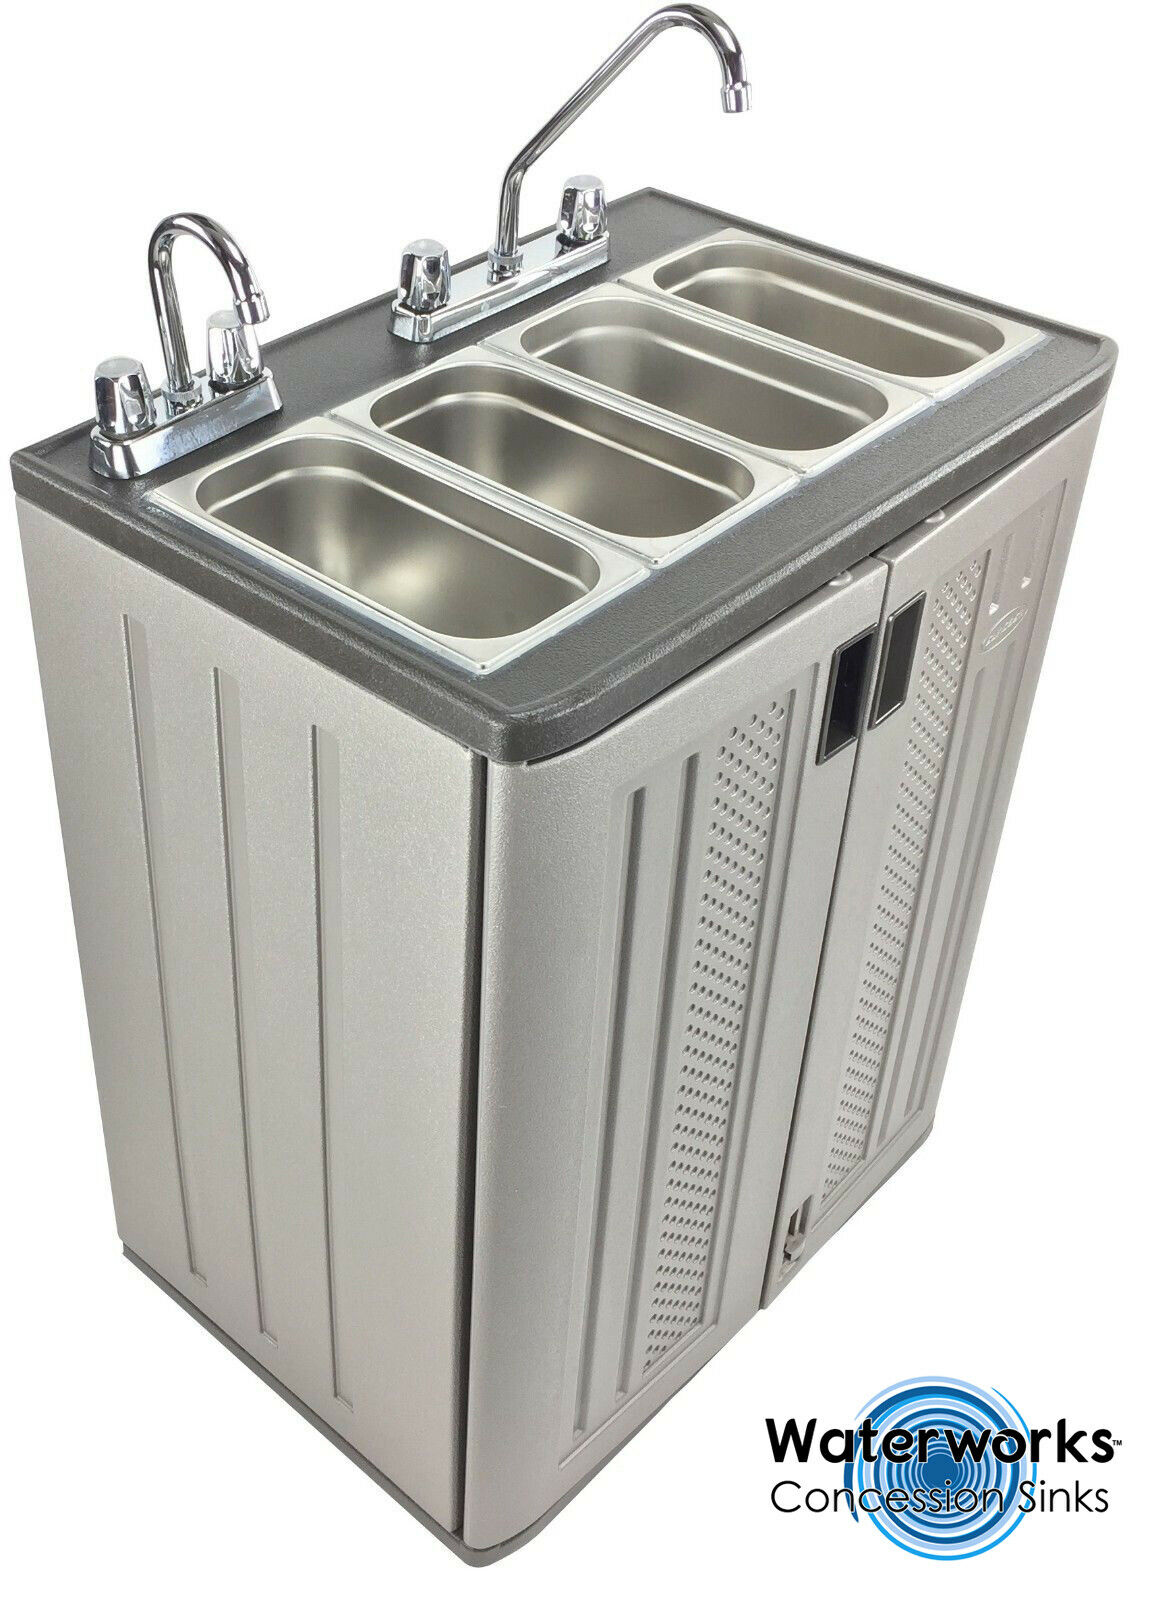 Mobile Concession Sink Portable Food Truck Trailer 4 Compartment Hand Wash Hot